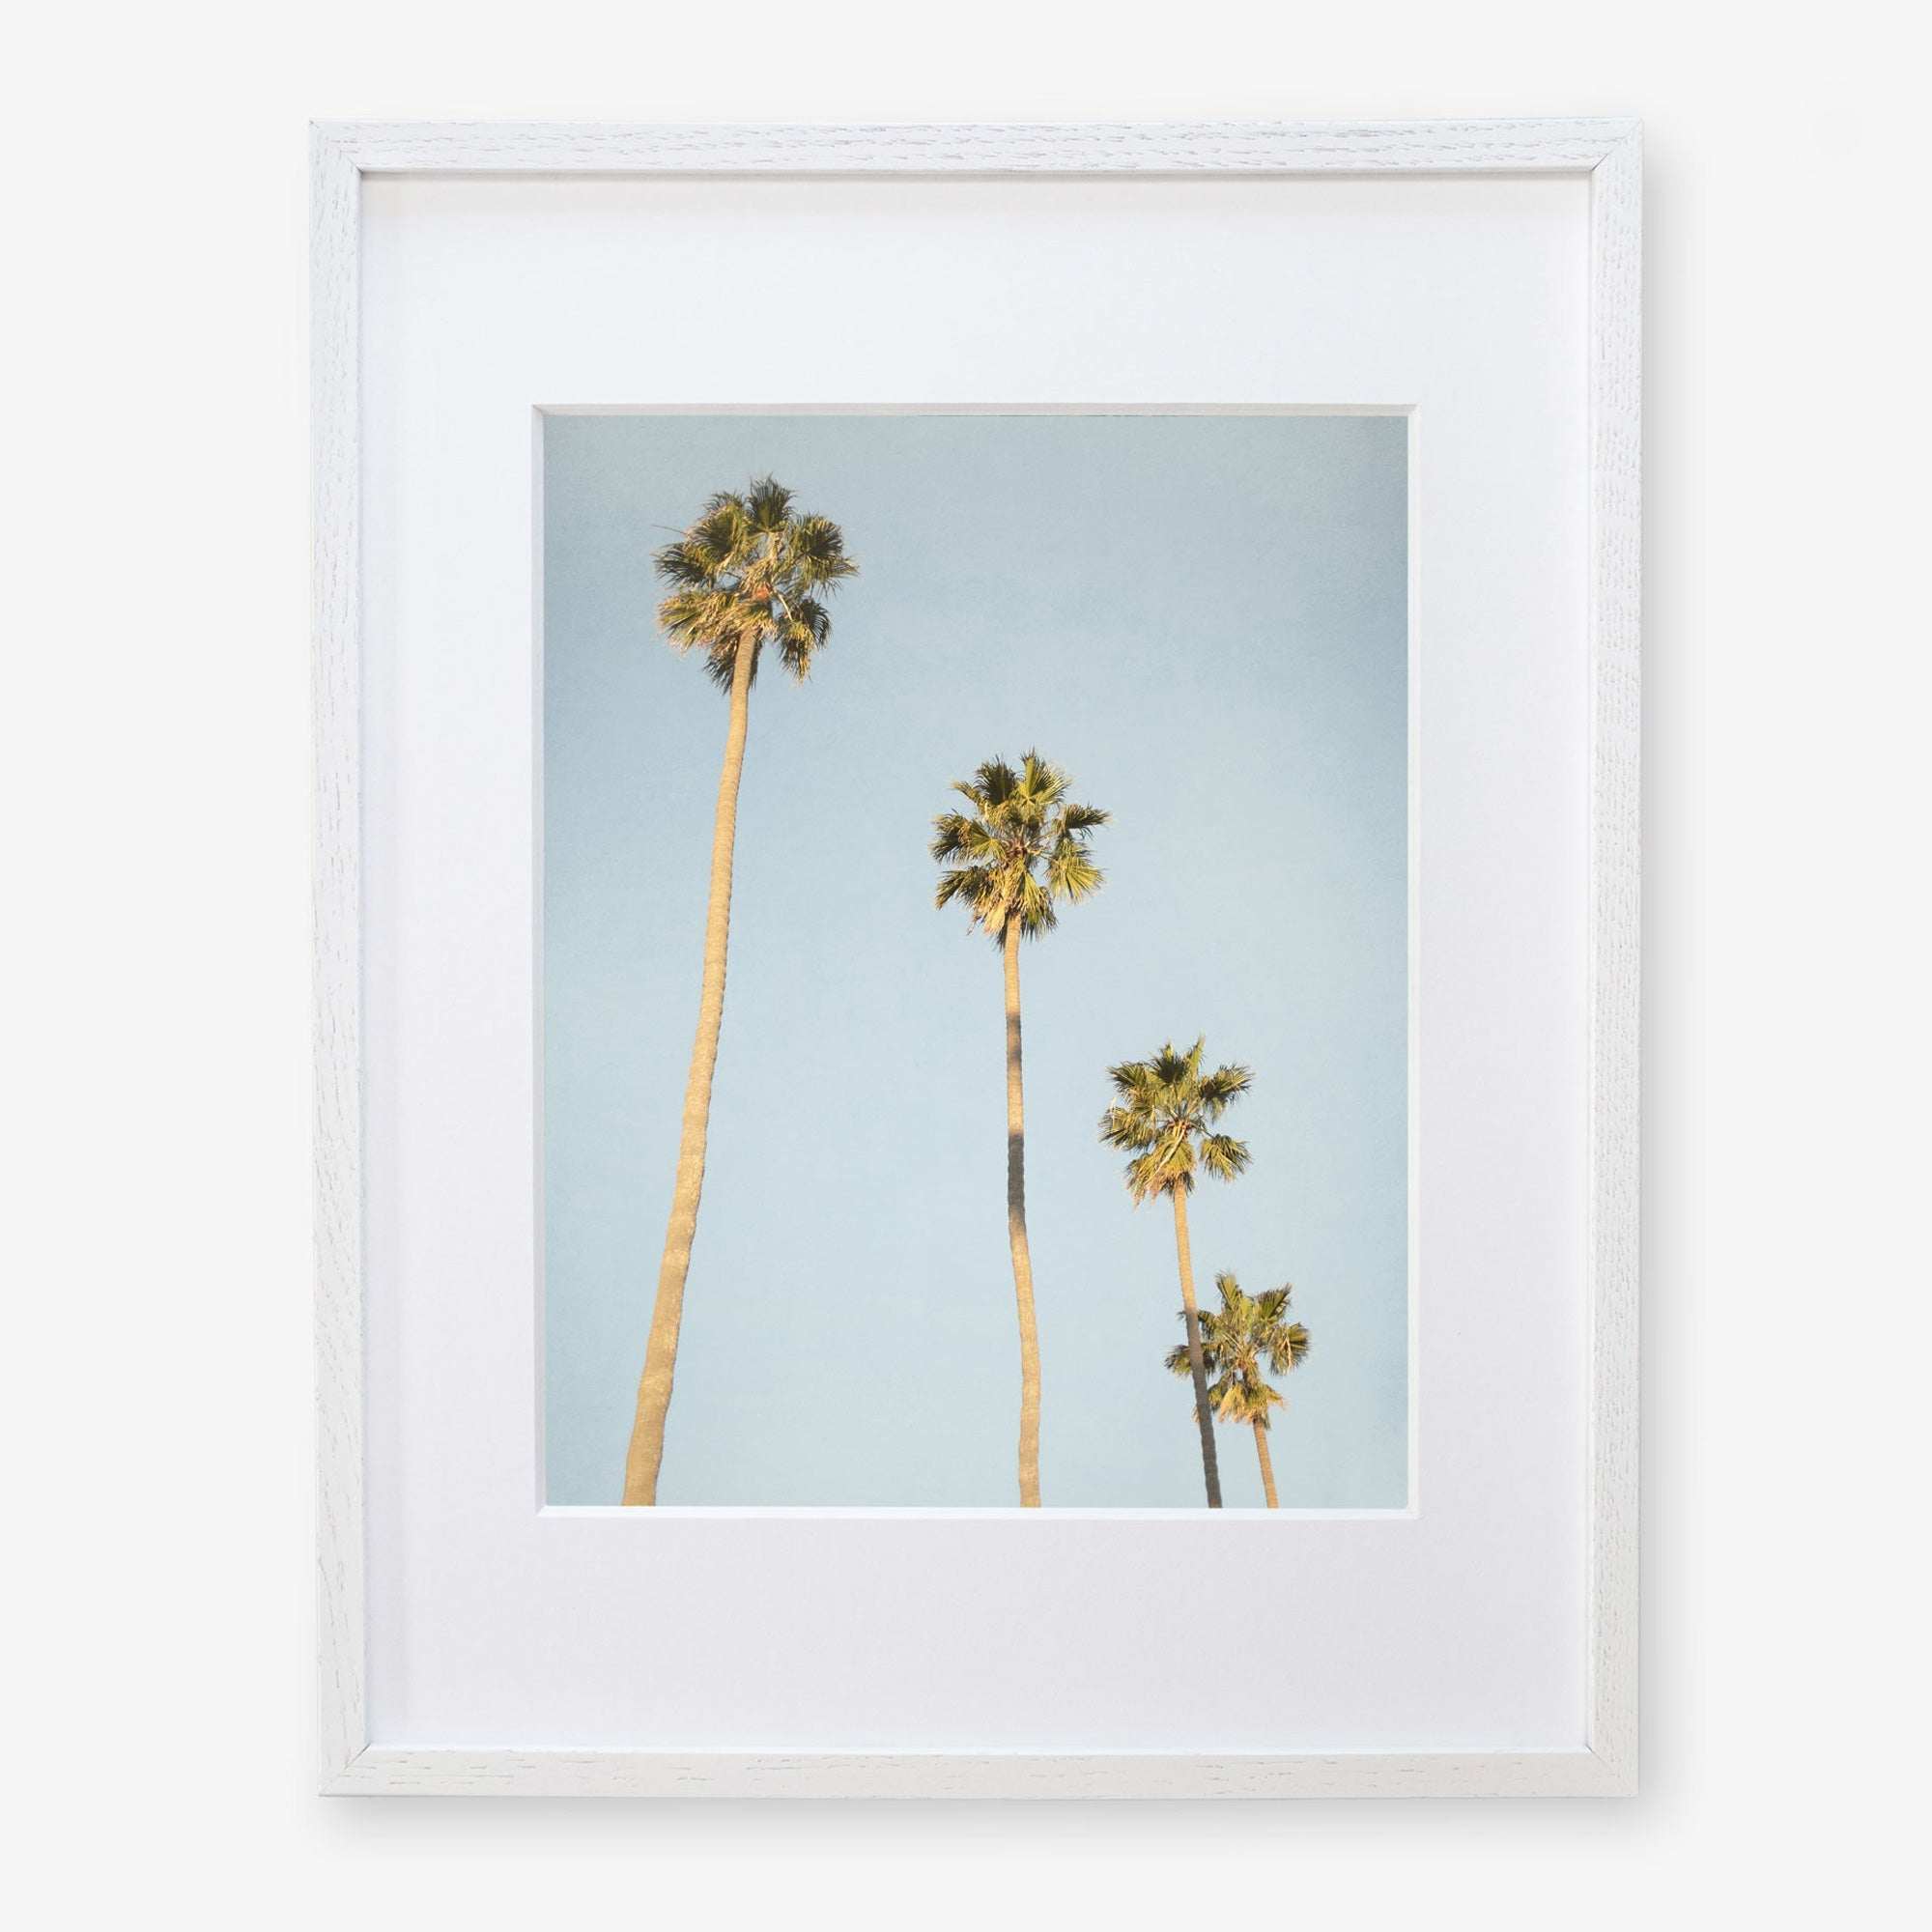 A framed Offley Green photograph depicting four tall palm trees against a clear California sky. The frame is white and the image emphasizes the height and slender trunks of the palms.